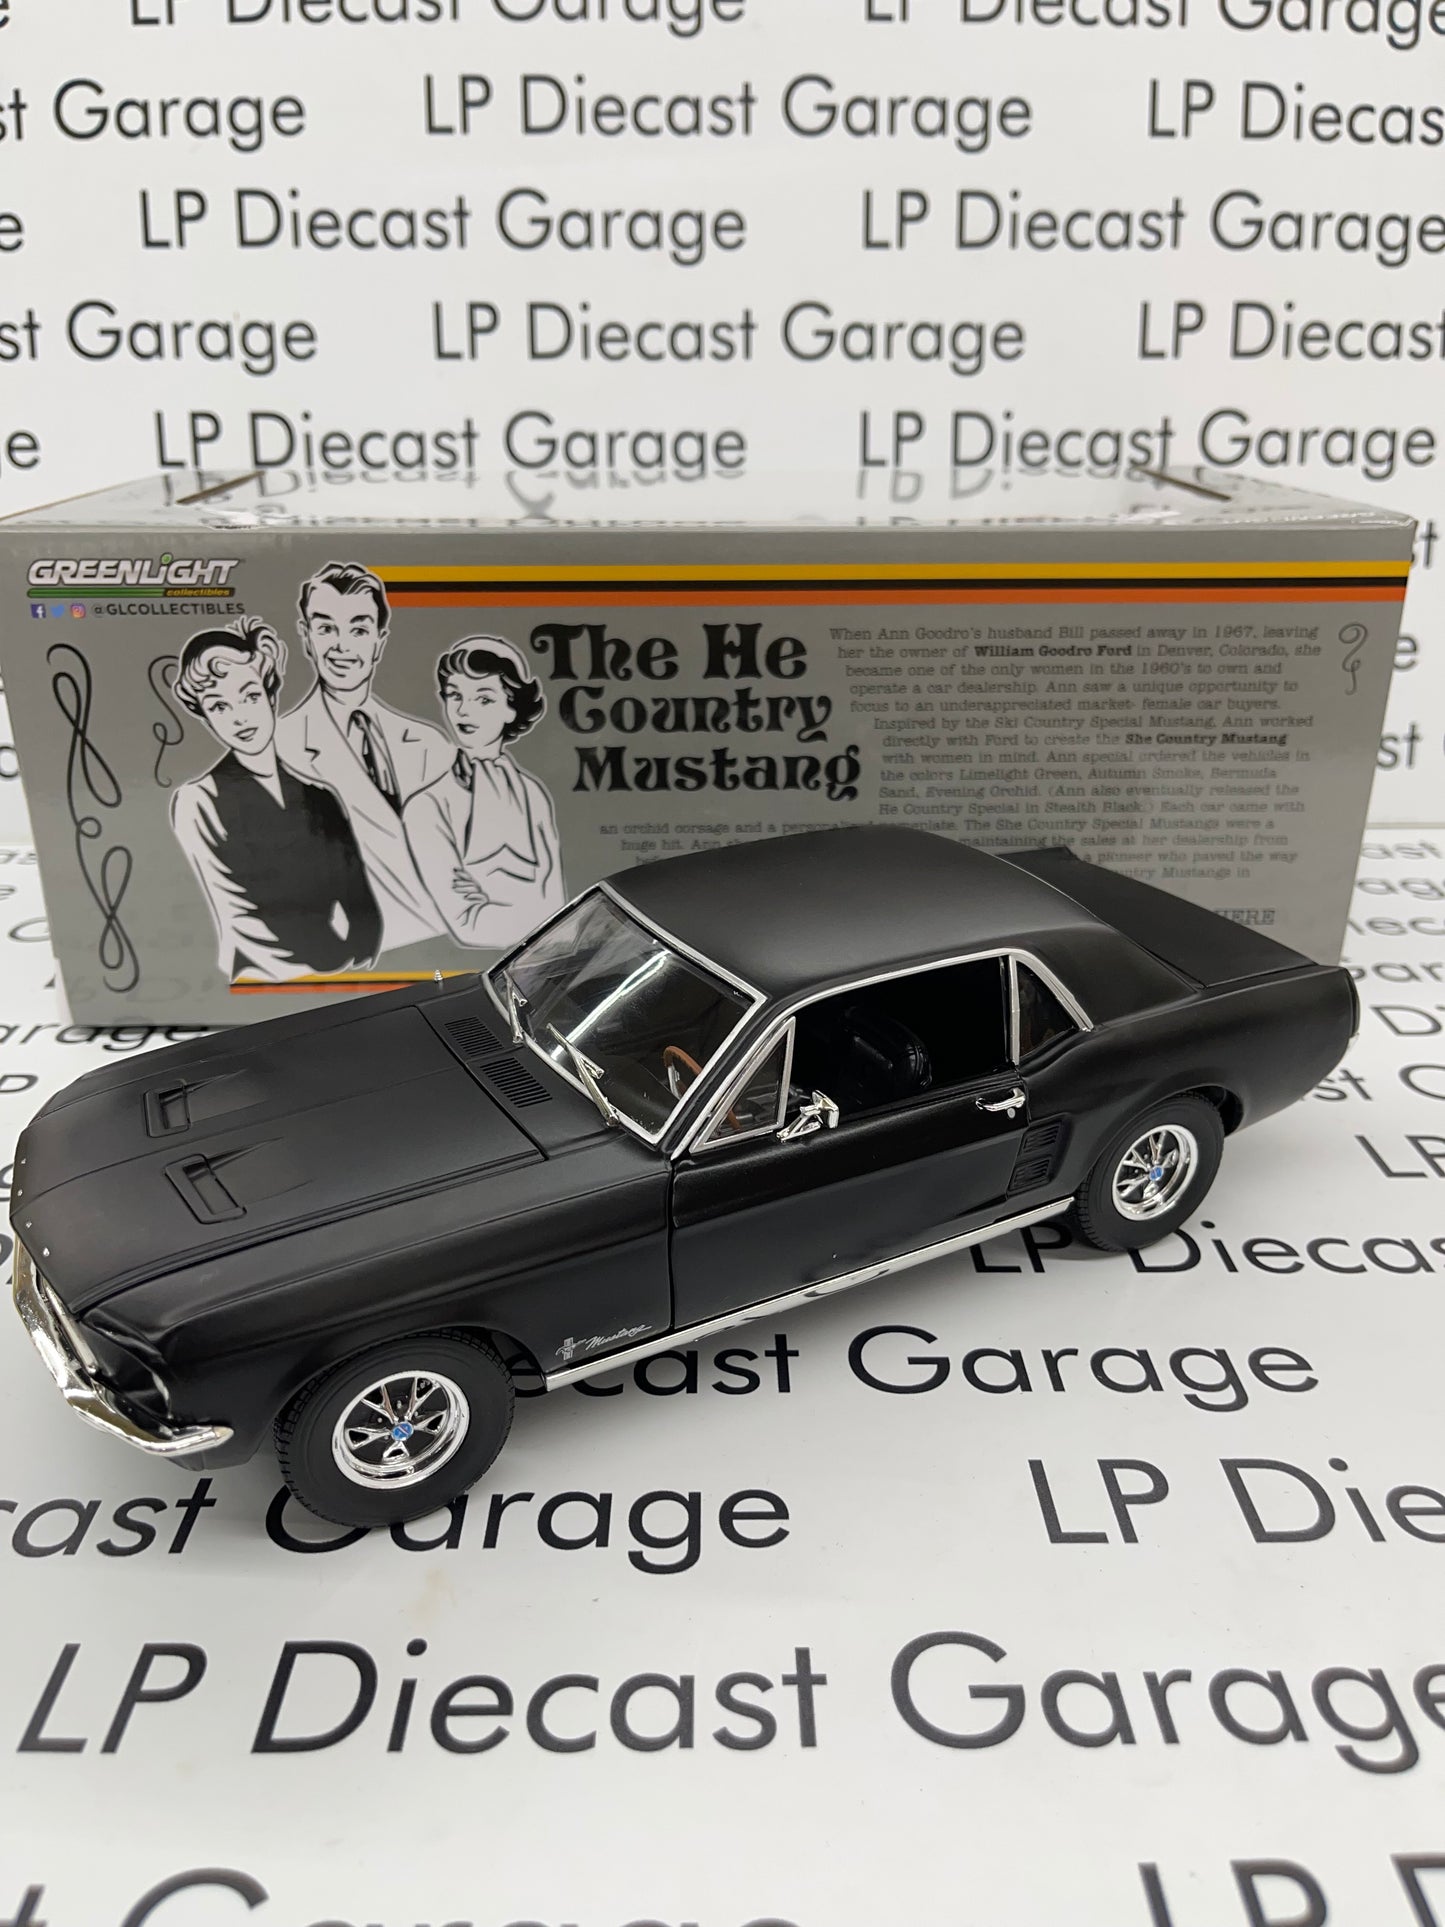 GREENLIGHT 1968 Ford Mustang Coupe Stealth Black He Country Special 1:18 Diecast